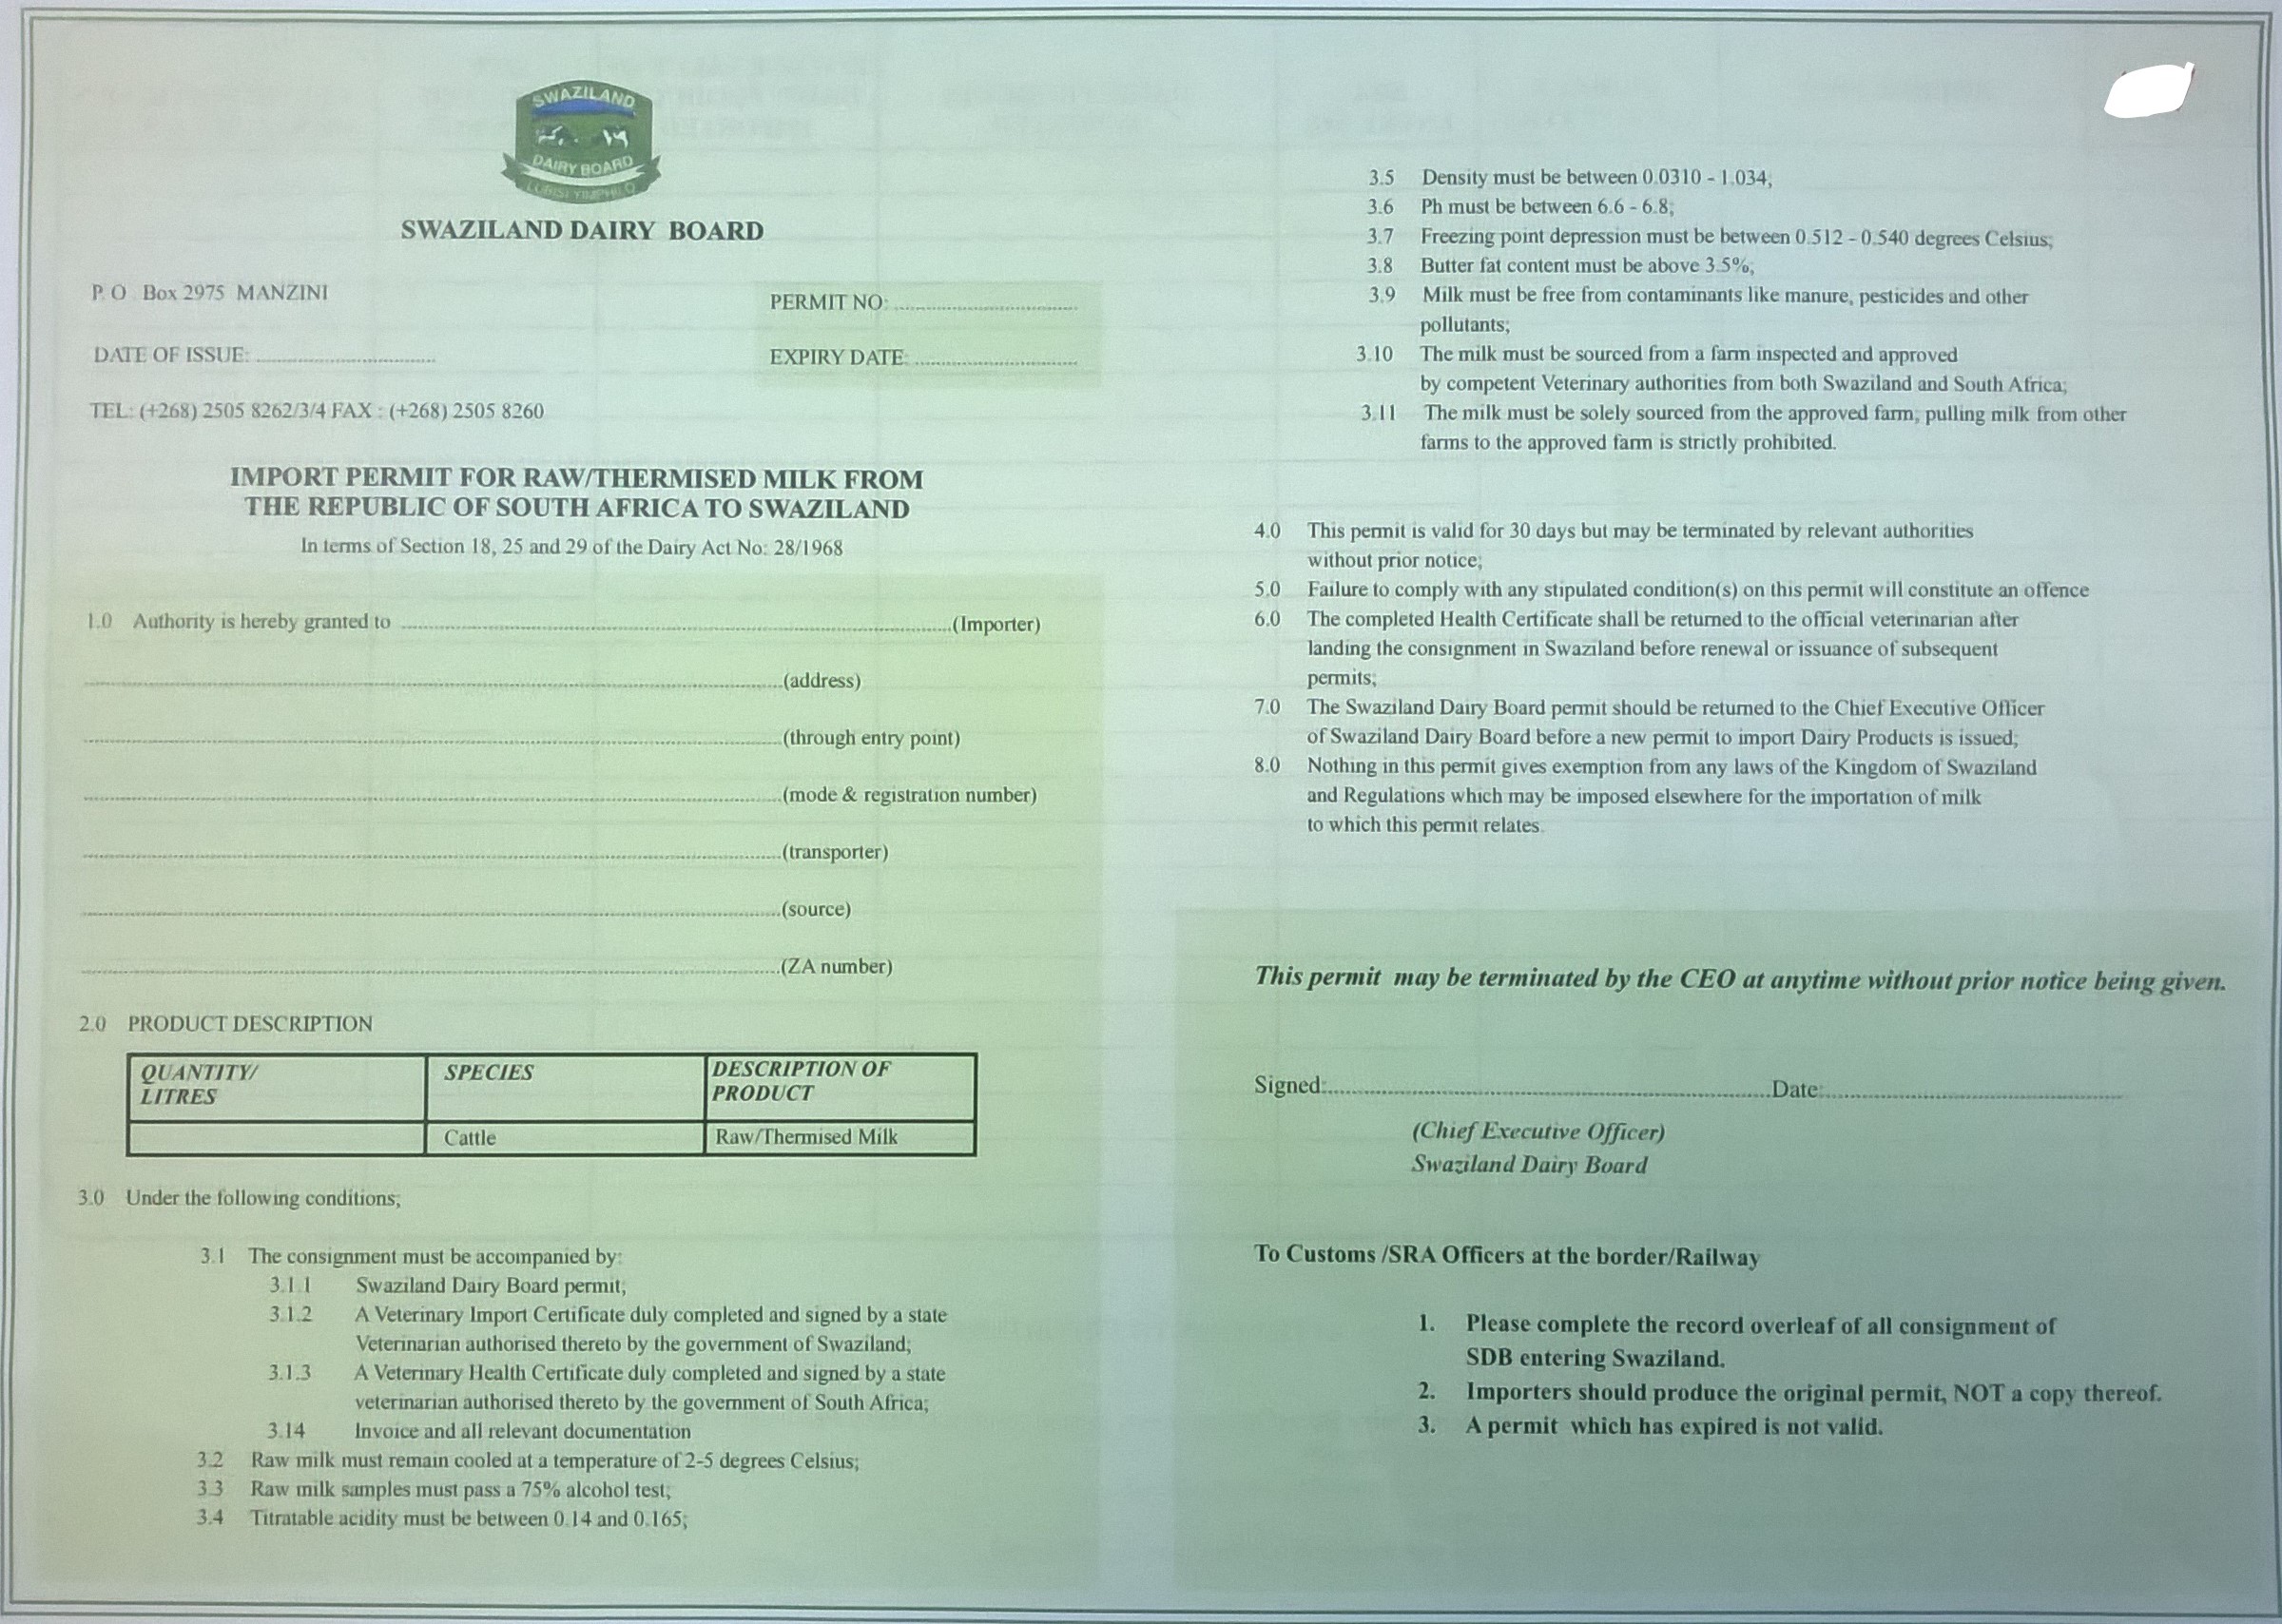 Permit to Import Raw/Thernised milk from the Republic of South Africa